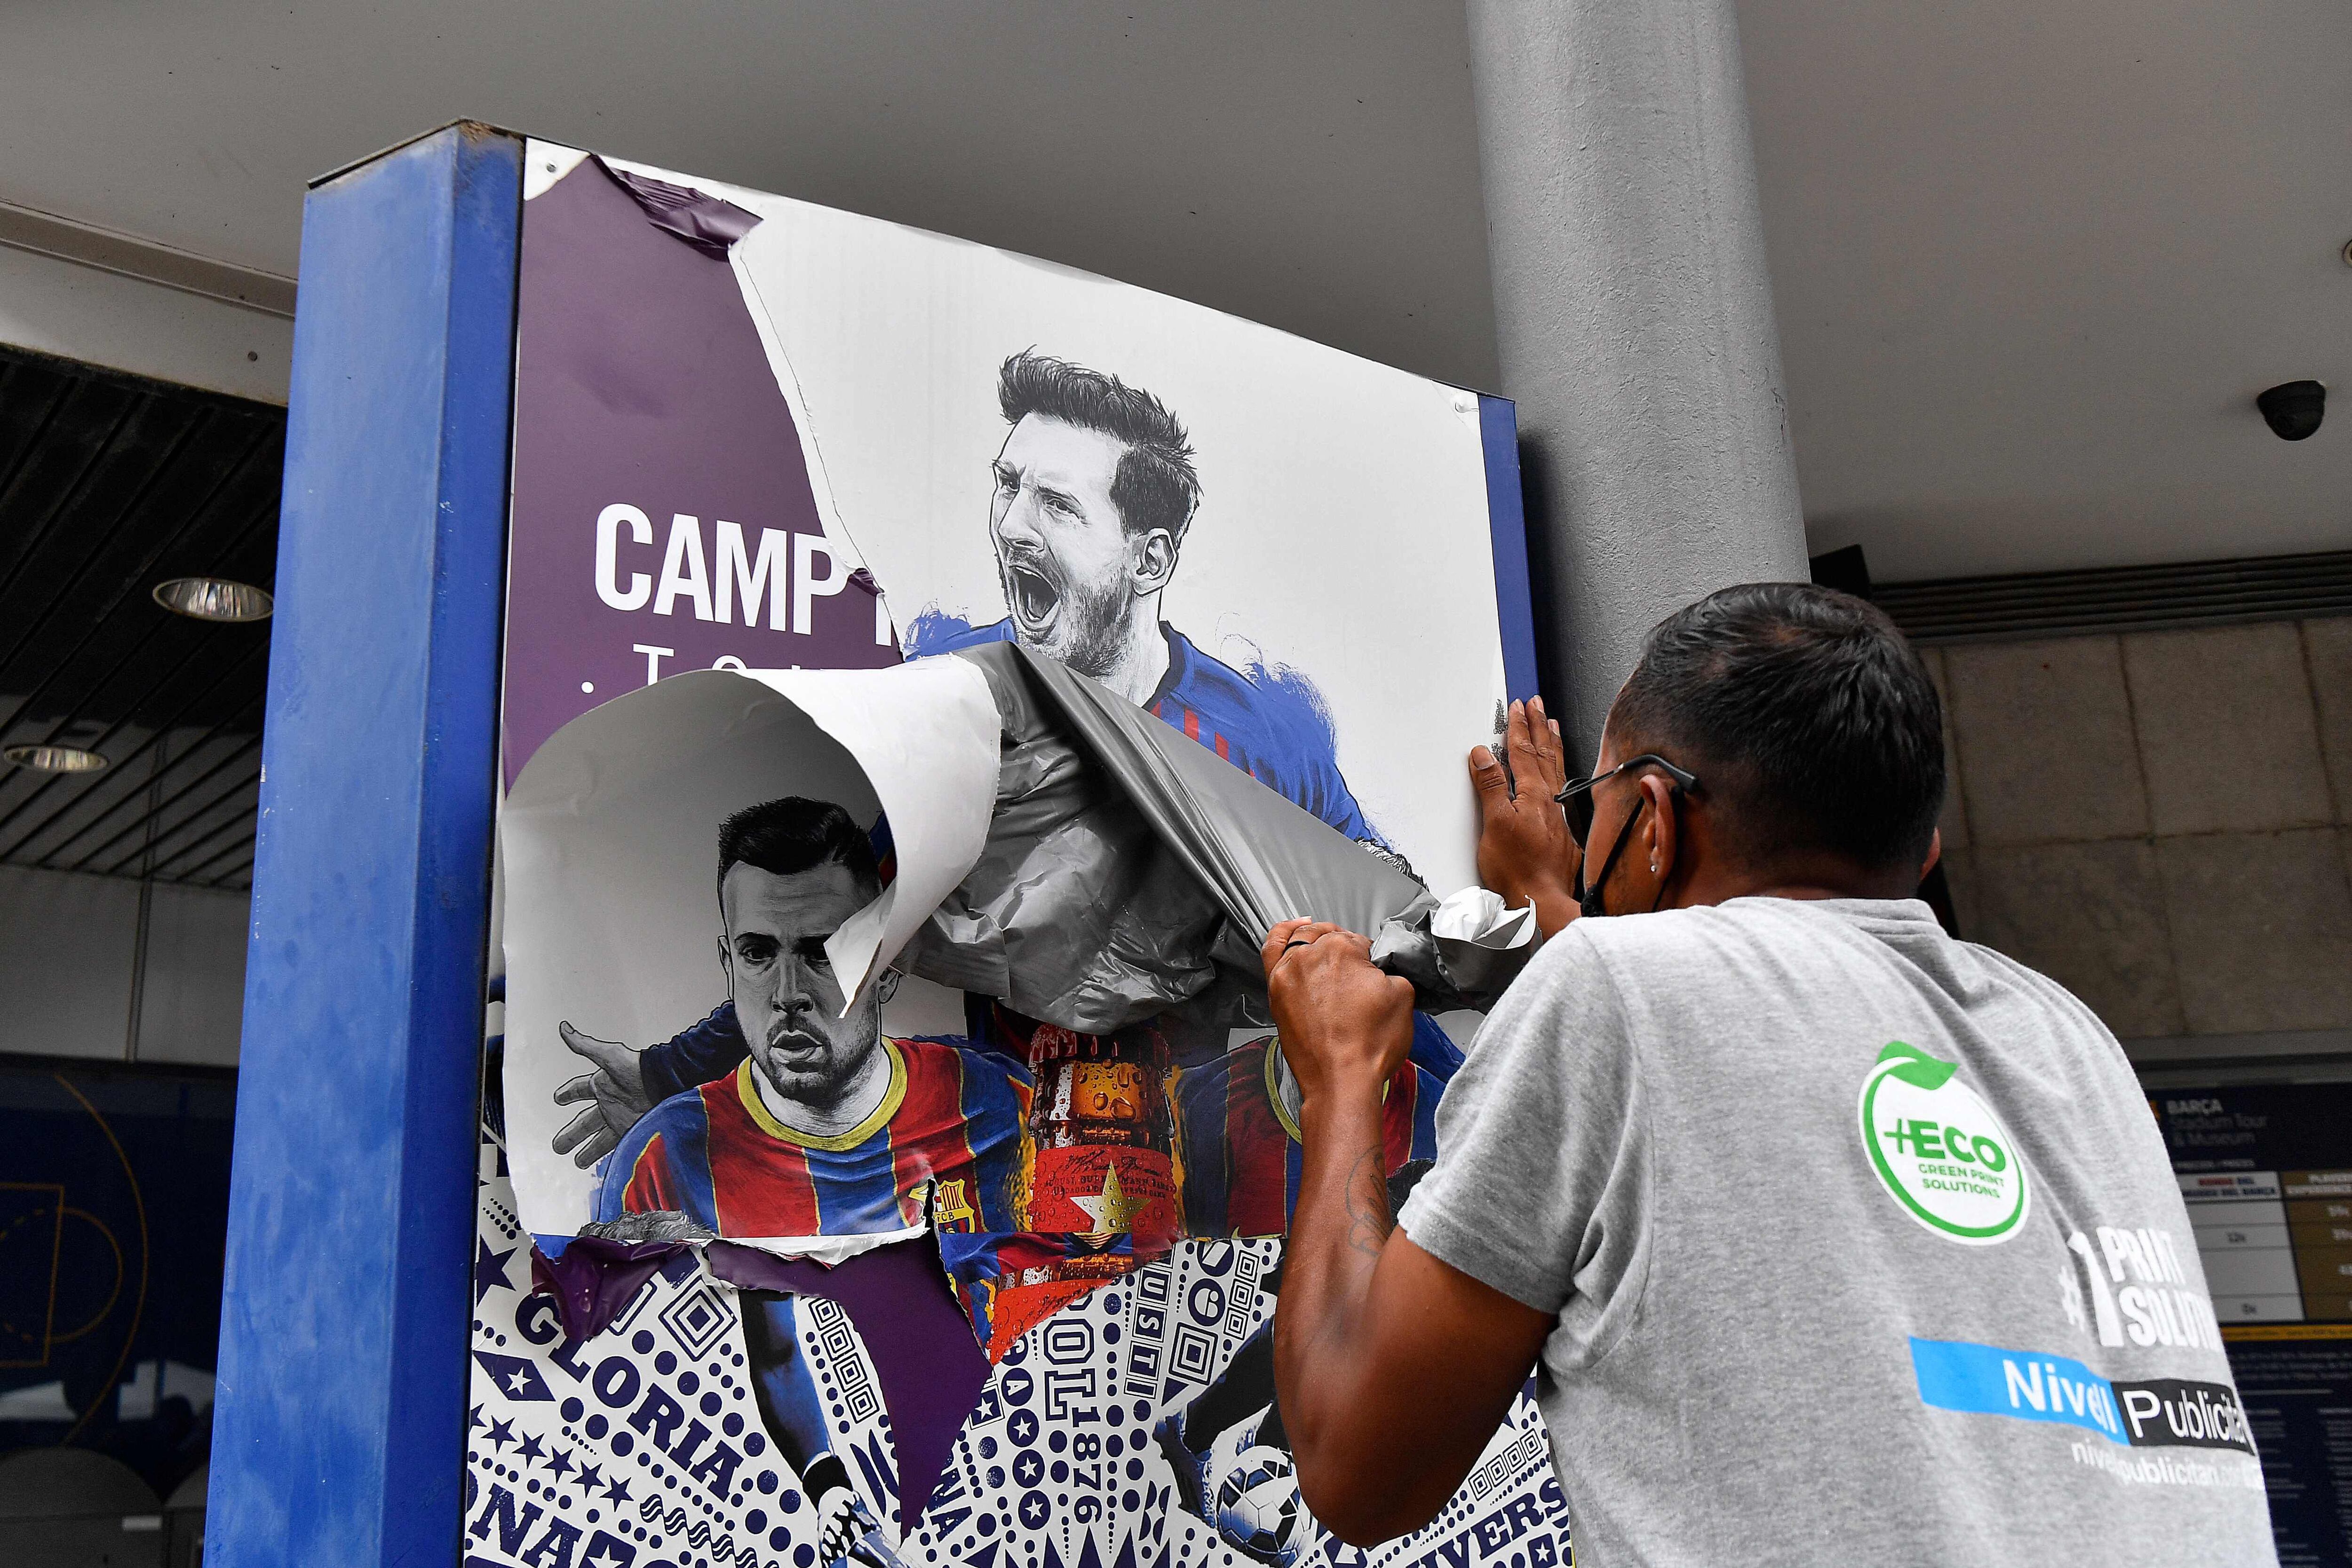 Barcelona without Lionel Messi: fears and frustrations of the Camp